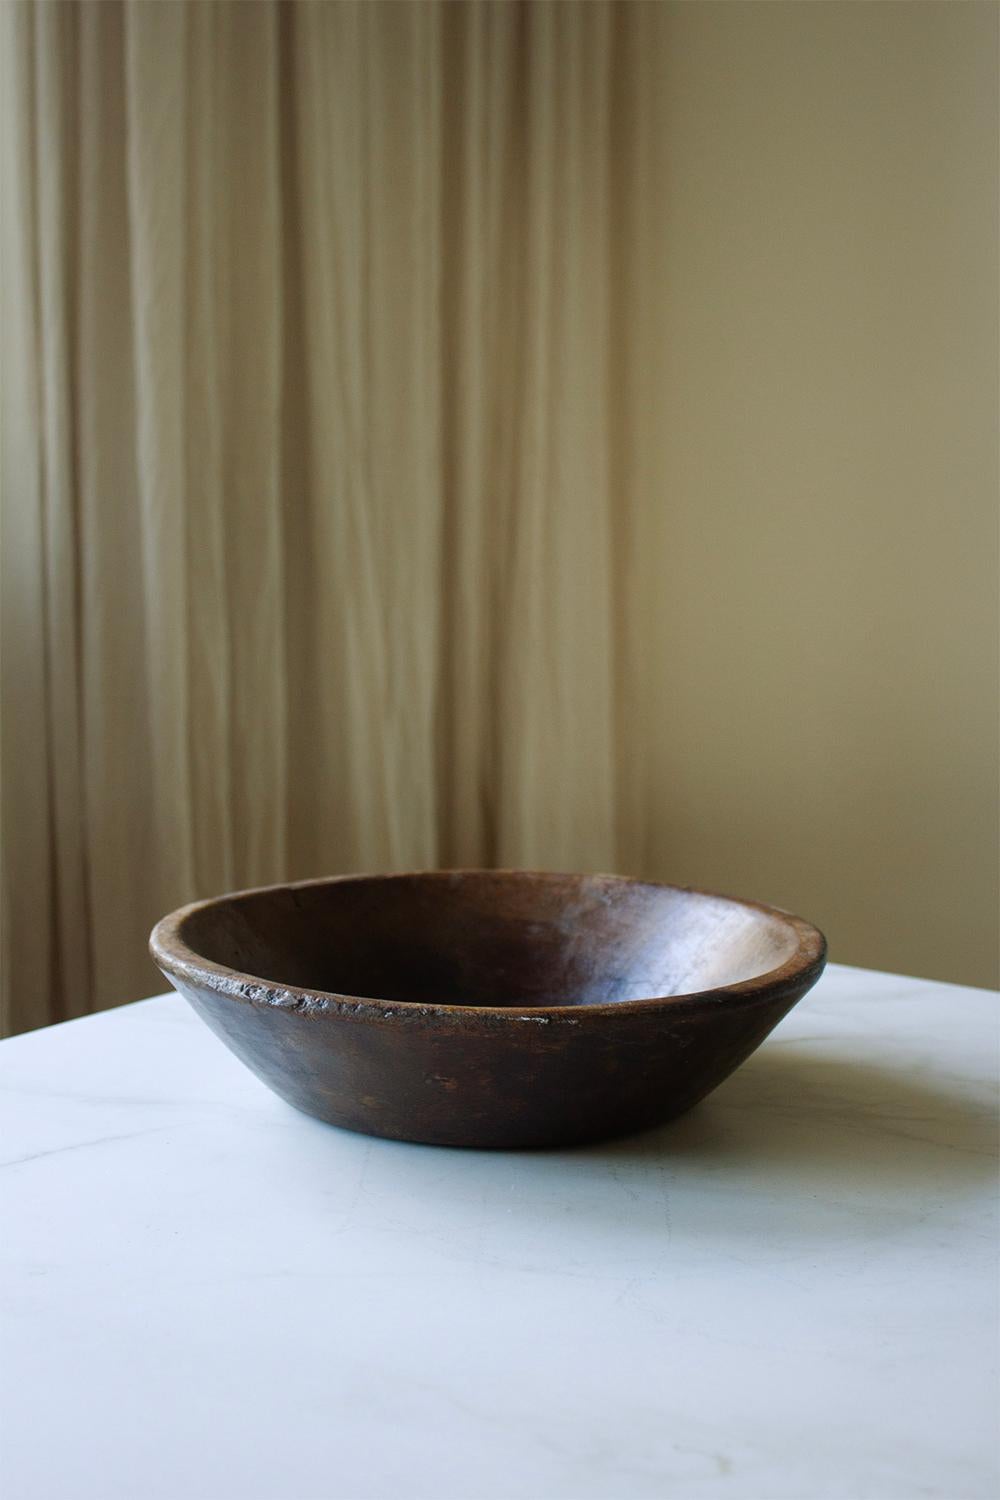 This Bowl is a blend of rustic charm and wood craftsmanship. Handcrafted by french traditional woodworkers, each bowl is a unique piece that captures the essence of the french provincial style. 

Crafted from local wood, this bowl showcases the